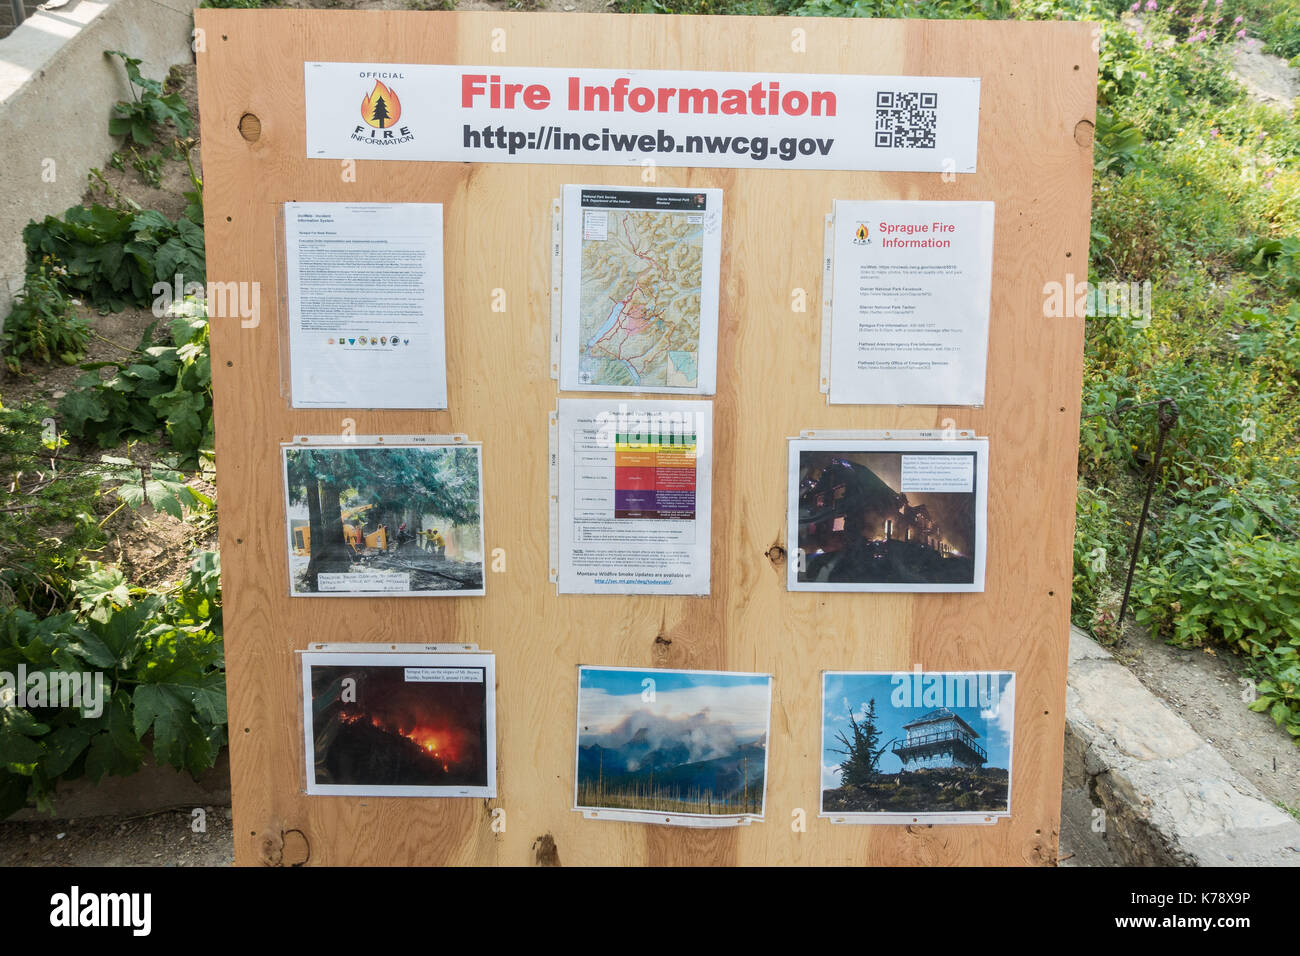 Information board and current air conditions on the Sprague Fire affecting the Glacier National Park, Montana posted at the Logan Pass visitor center Stock Photo